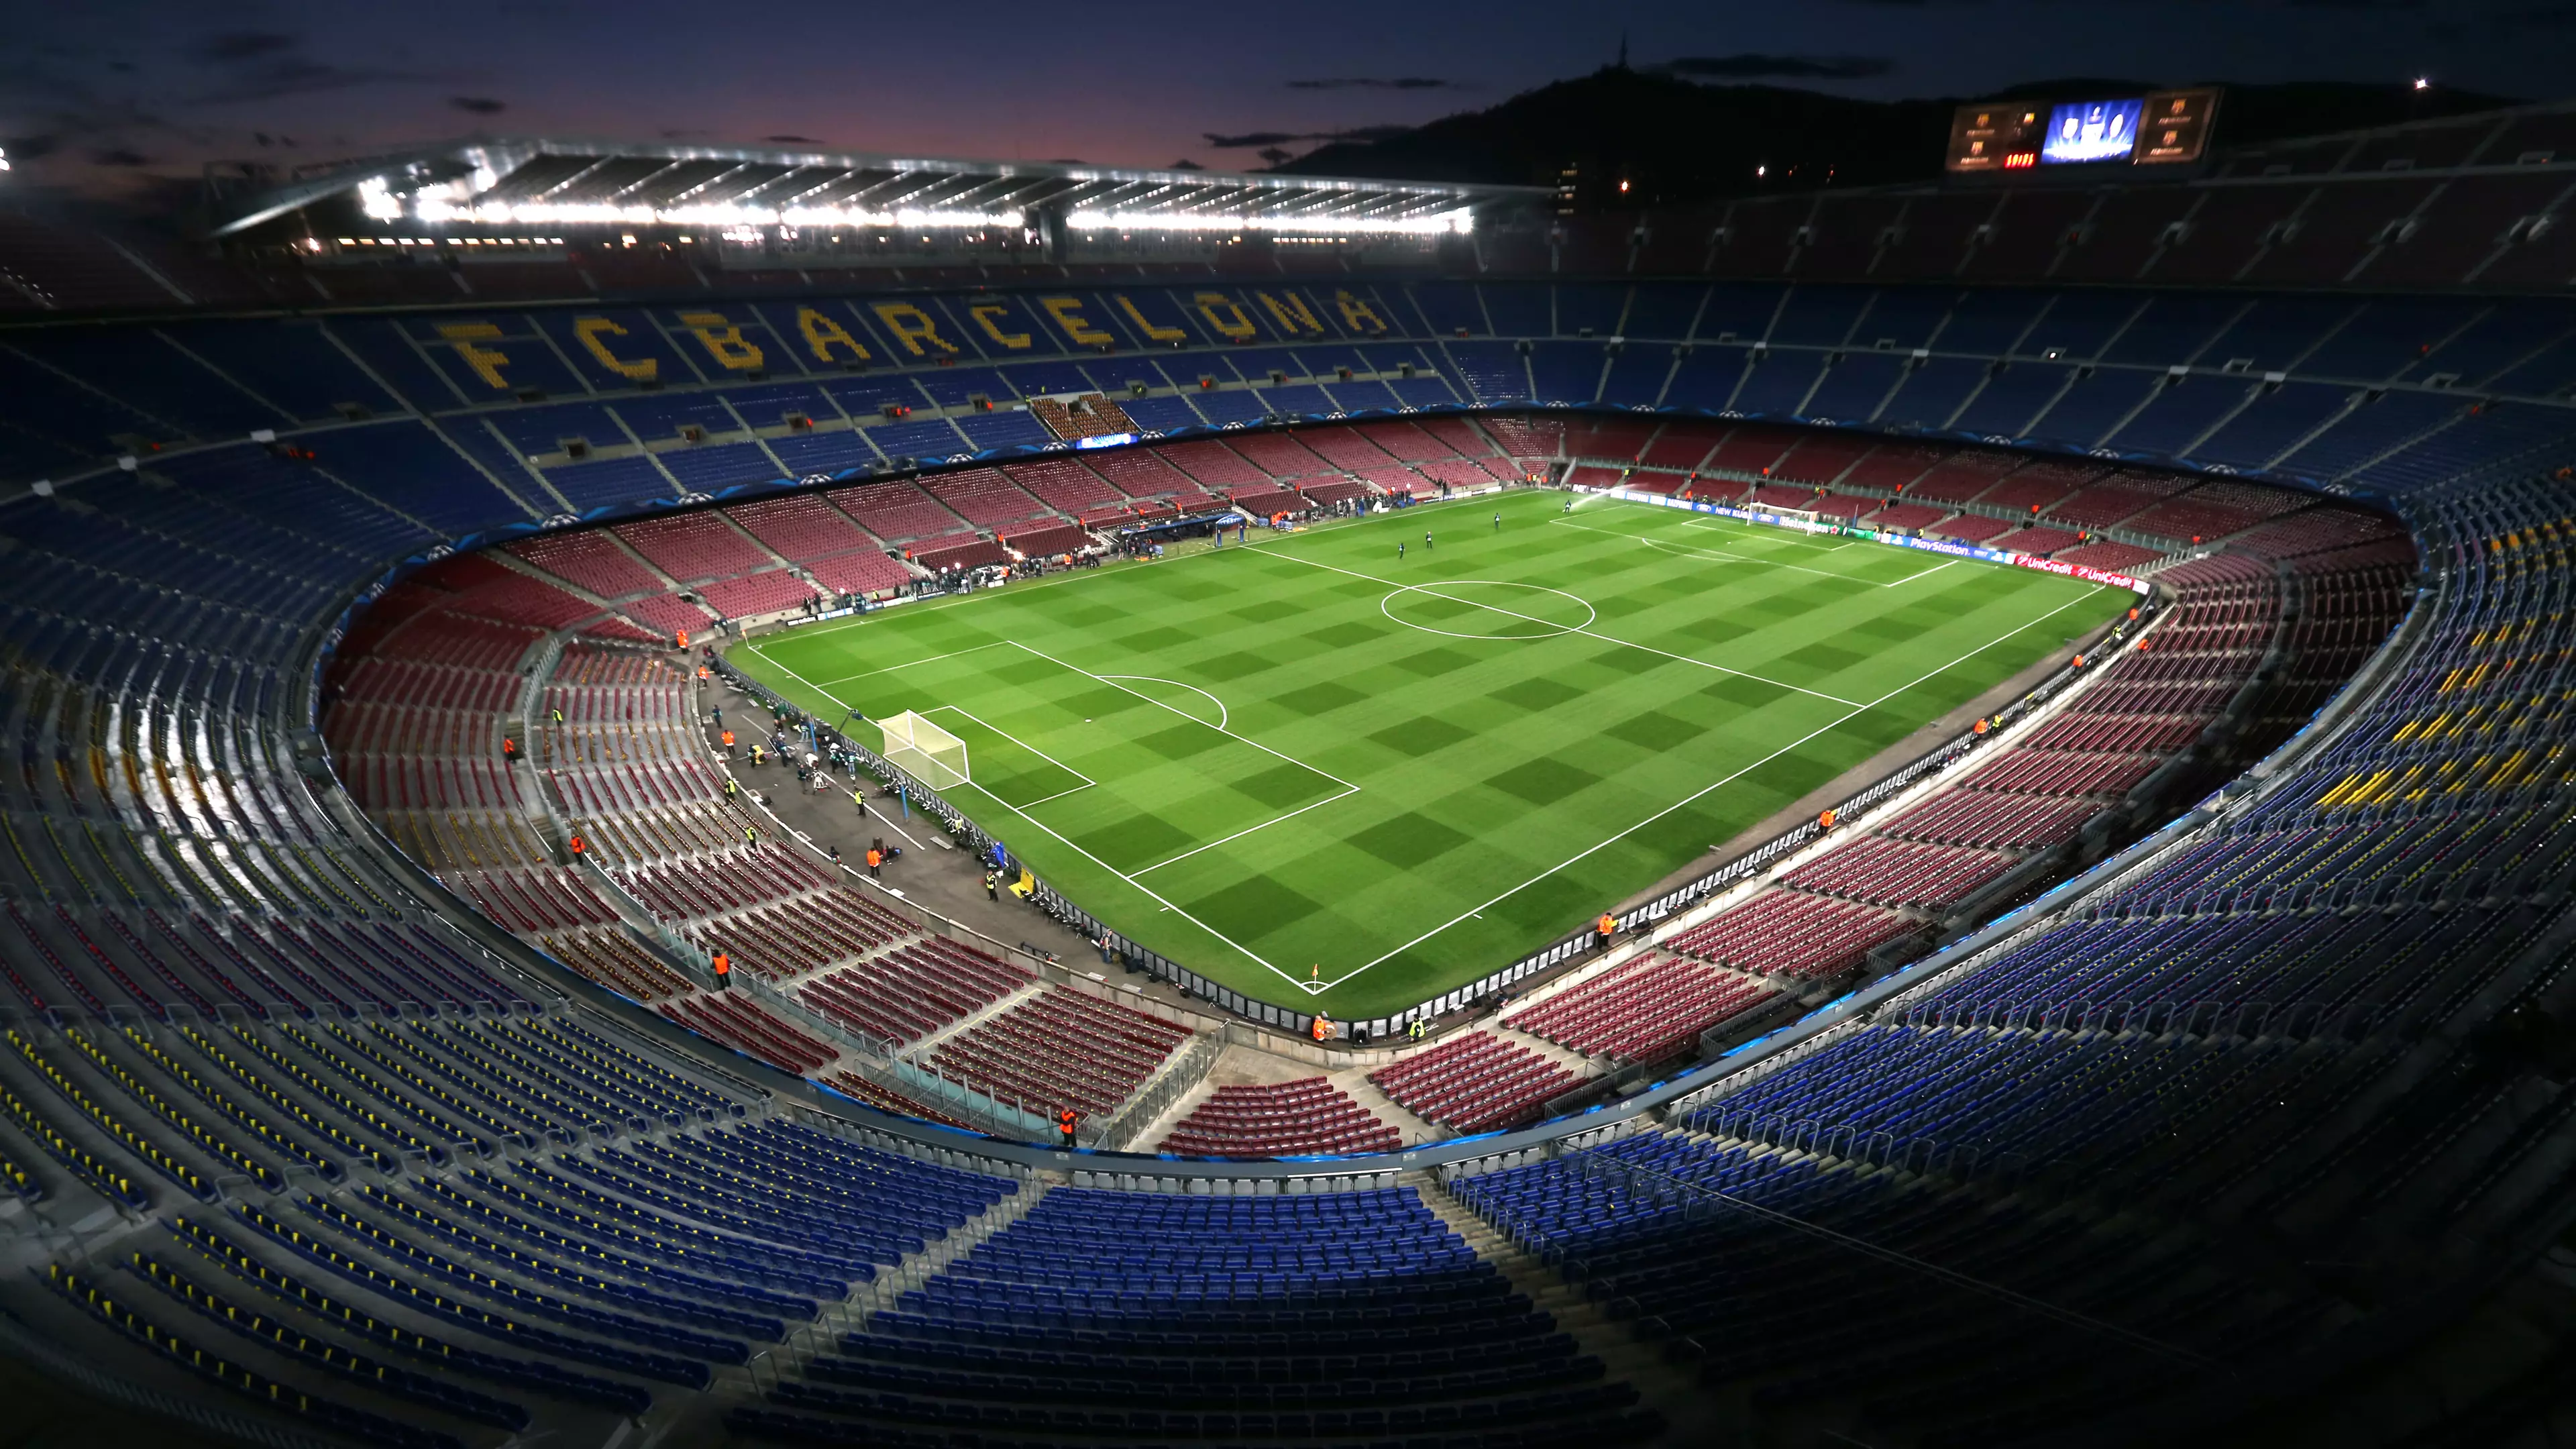 Barcelona To Sell Naming Rights of Nou Camp For One Year, Proceeds Going Towards COVID-19 Research